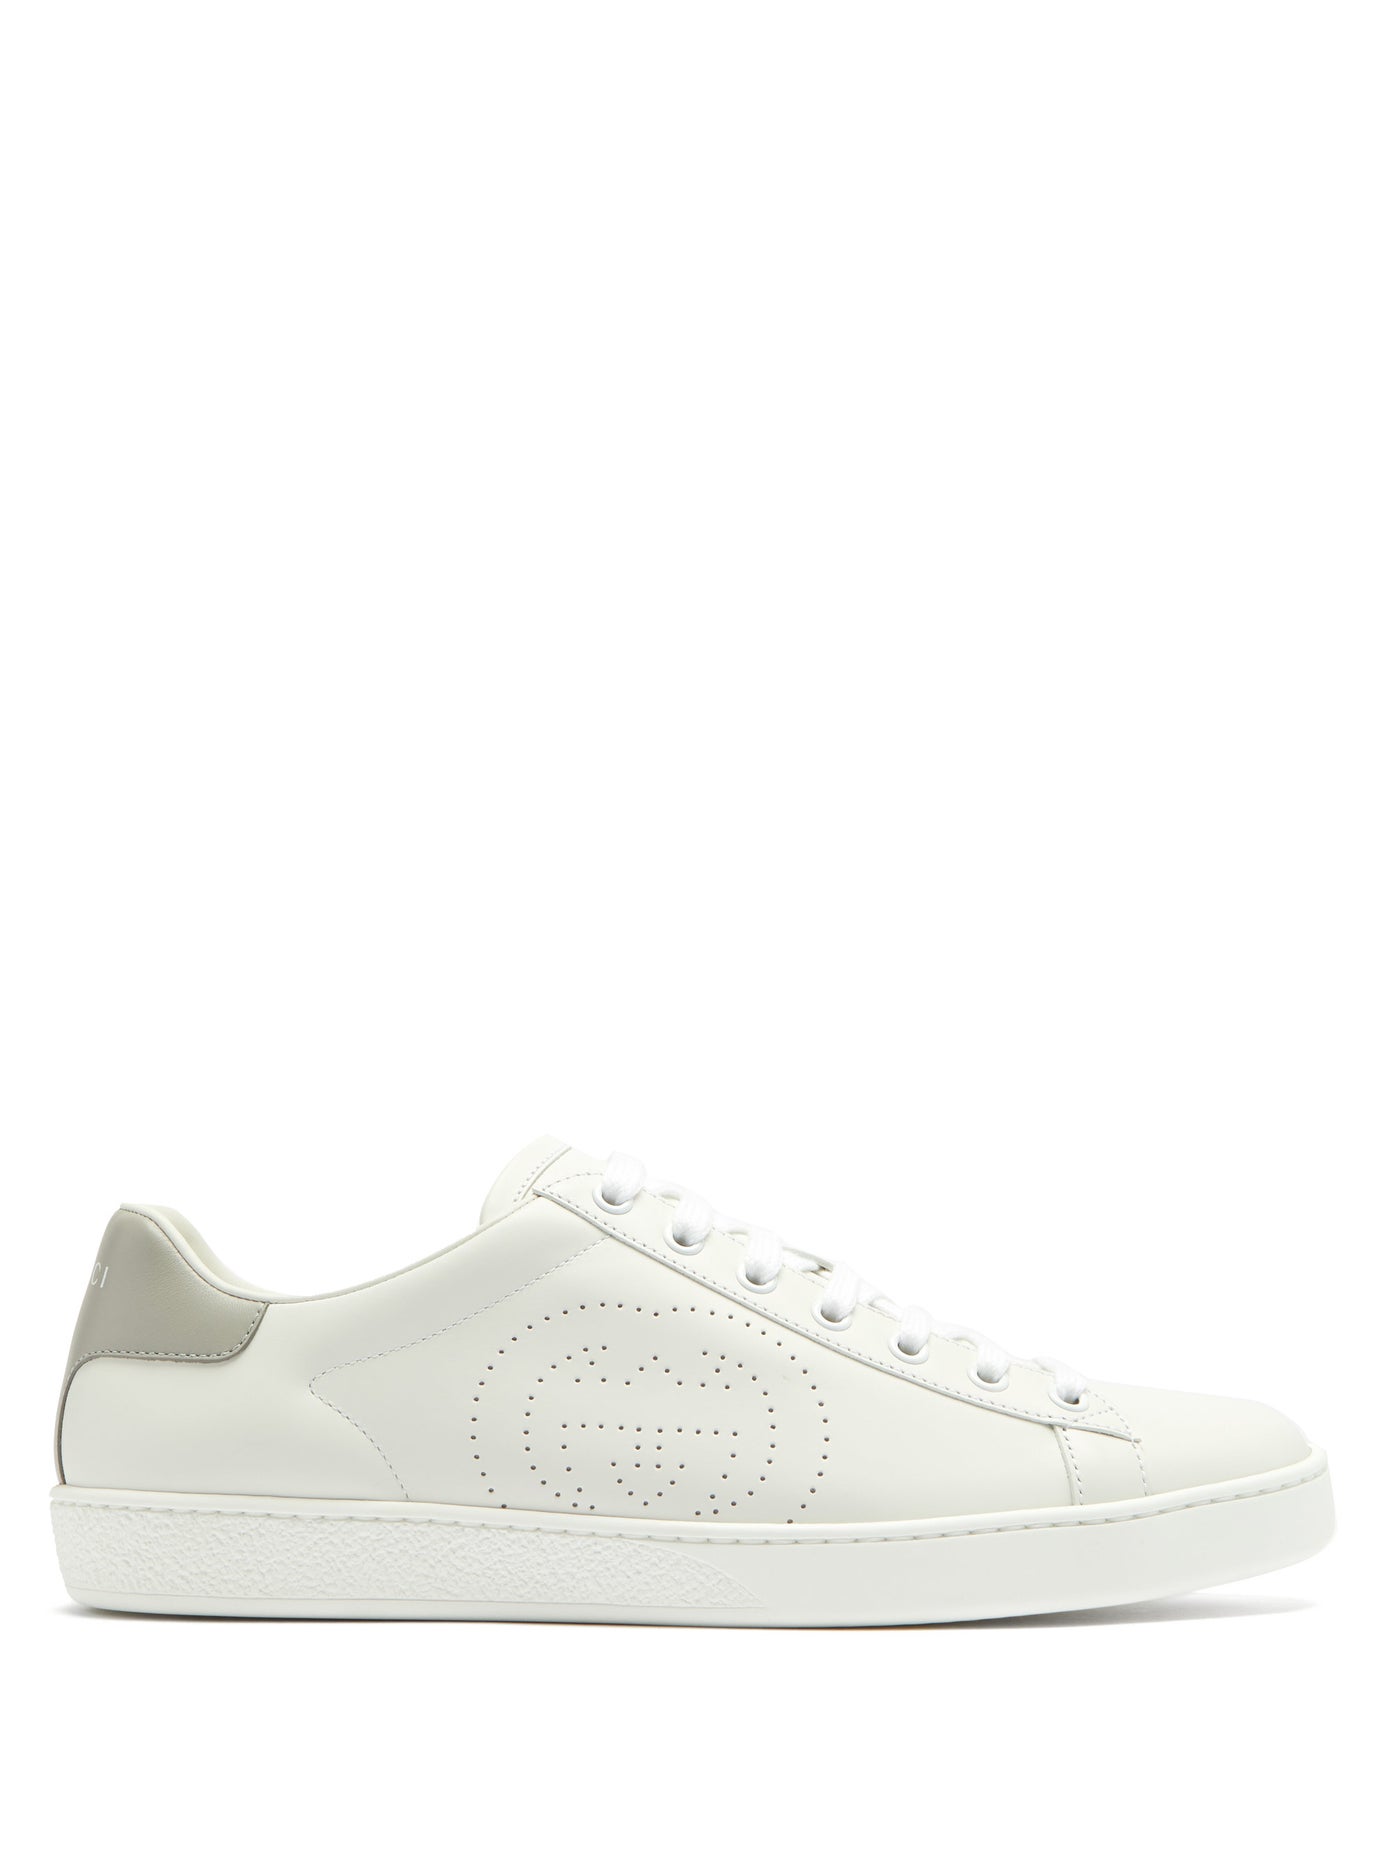 Gucci - New Ace Perforated Logo Leather Trainers | ABOUT ICONS